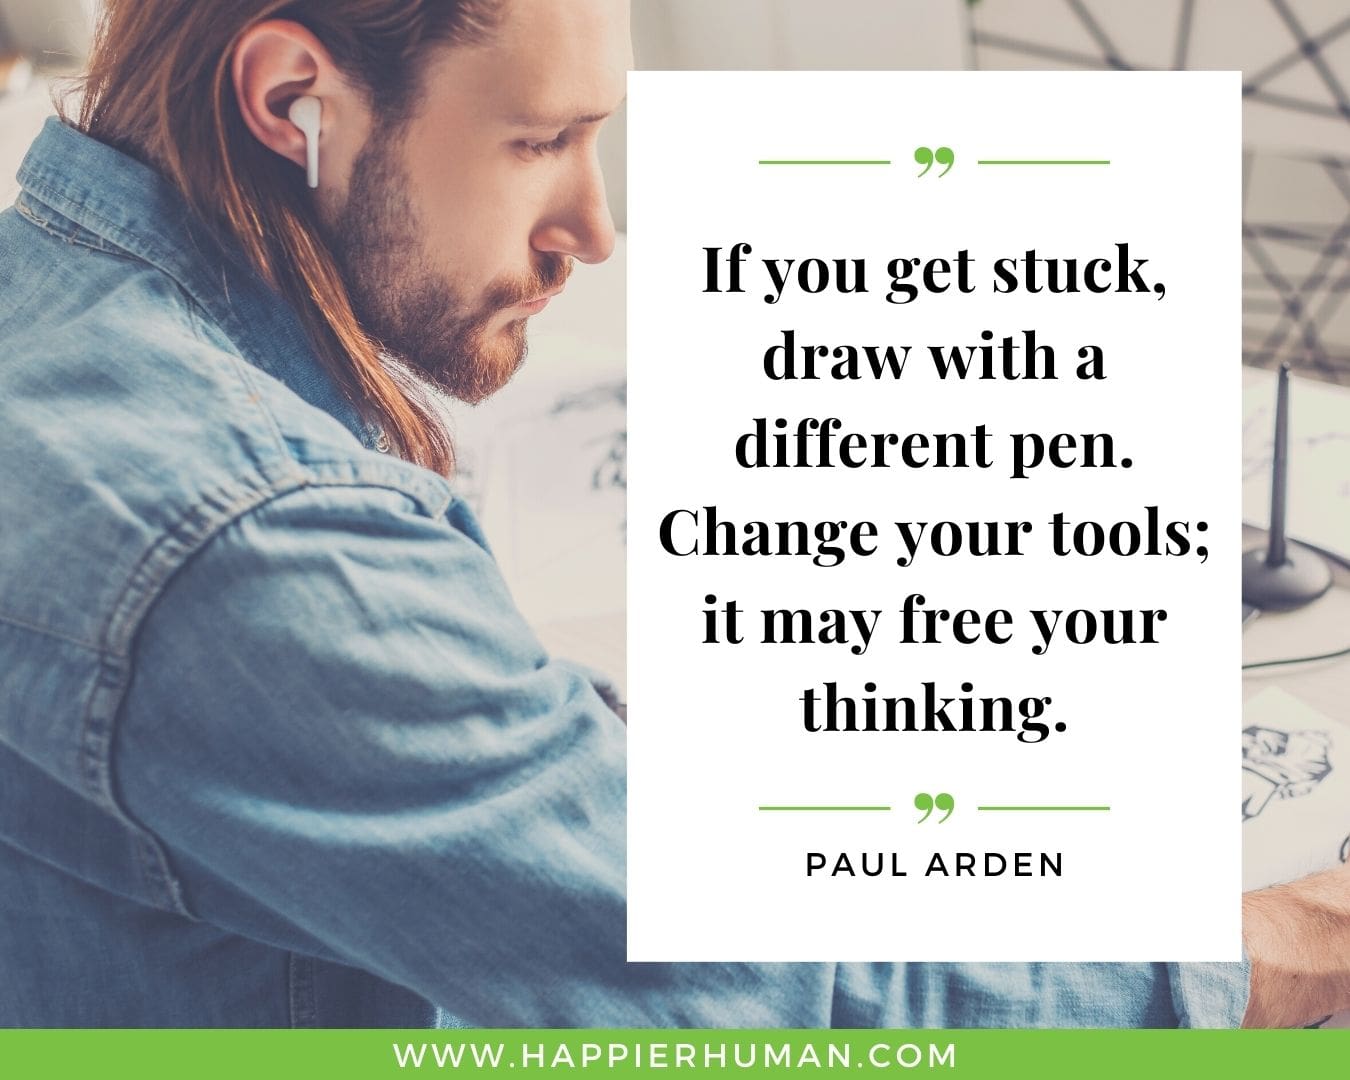 Overthinking Quotes - “If you get stuck, draw with a different pen. Change your tools; it may free your thinking.” - Paul Arden